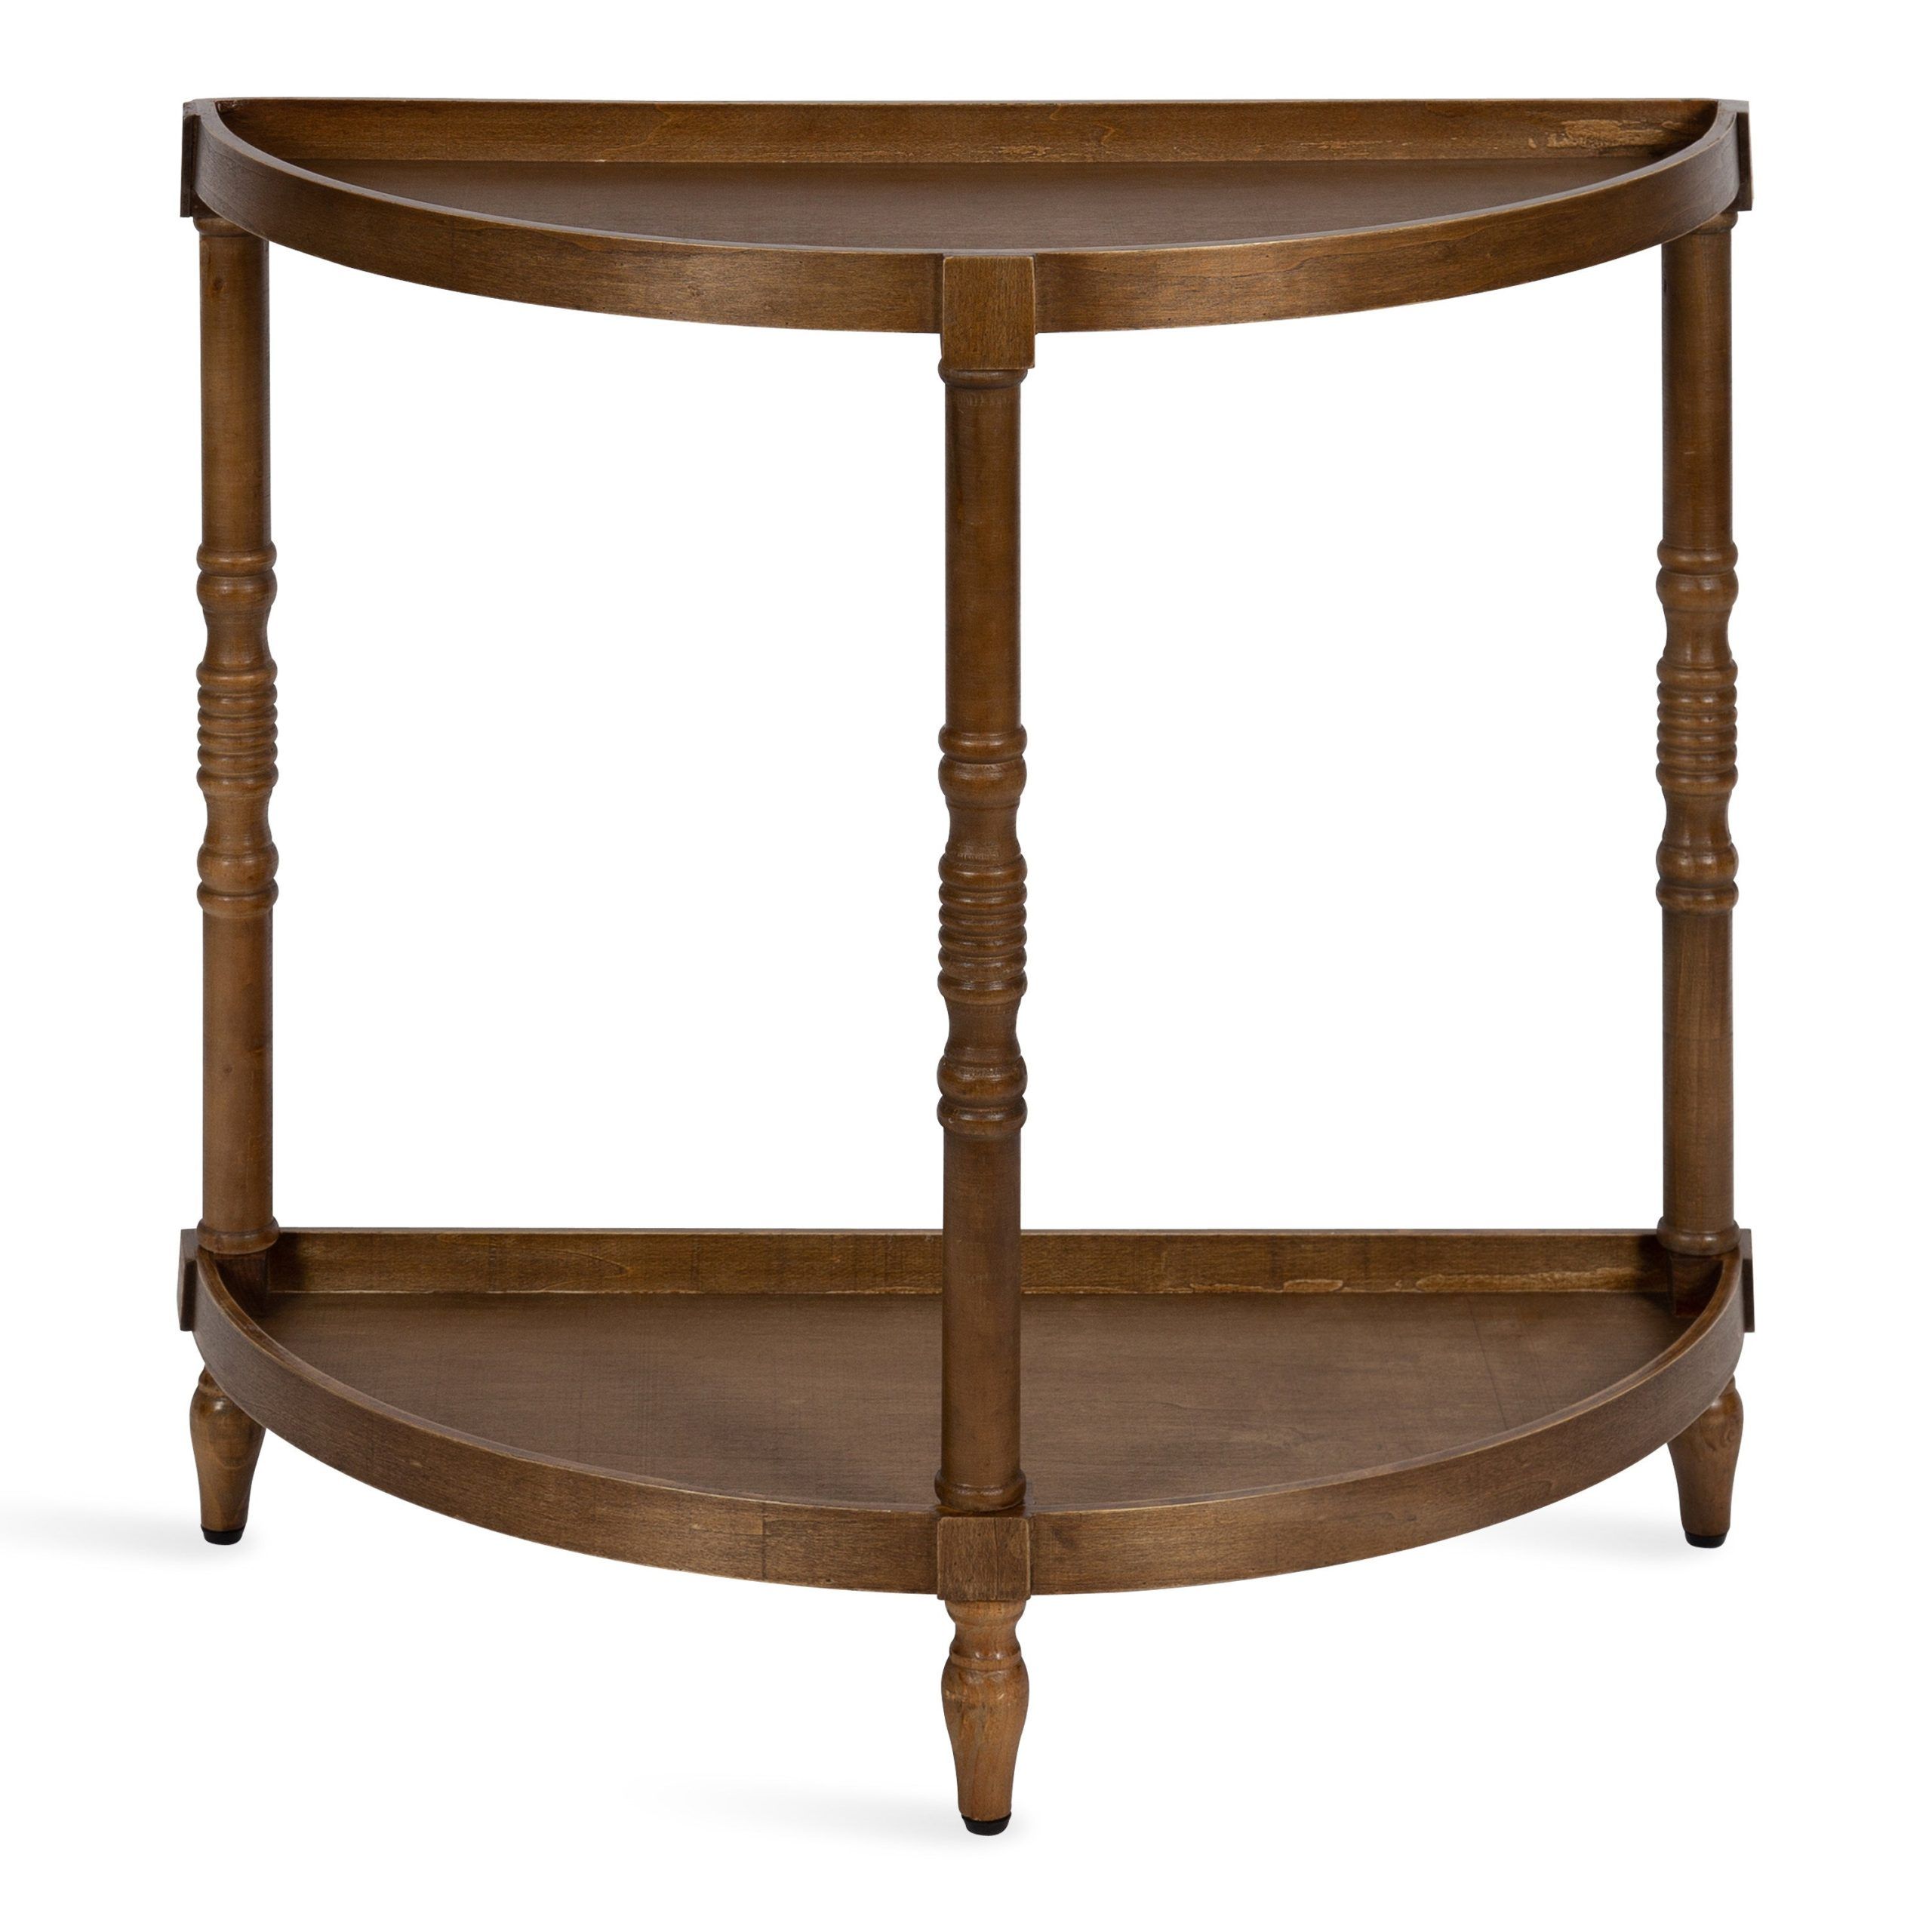 Kate And Laurel Bellport Farmhouse Demilune Console Table, 30 X 14 X 30 With Regard To Kate And Laurel Bellport Farmhouse Drink Tables (Gallery 16 of 20)